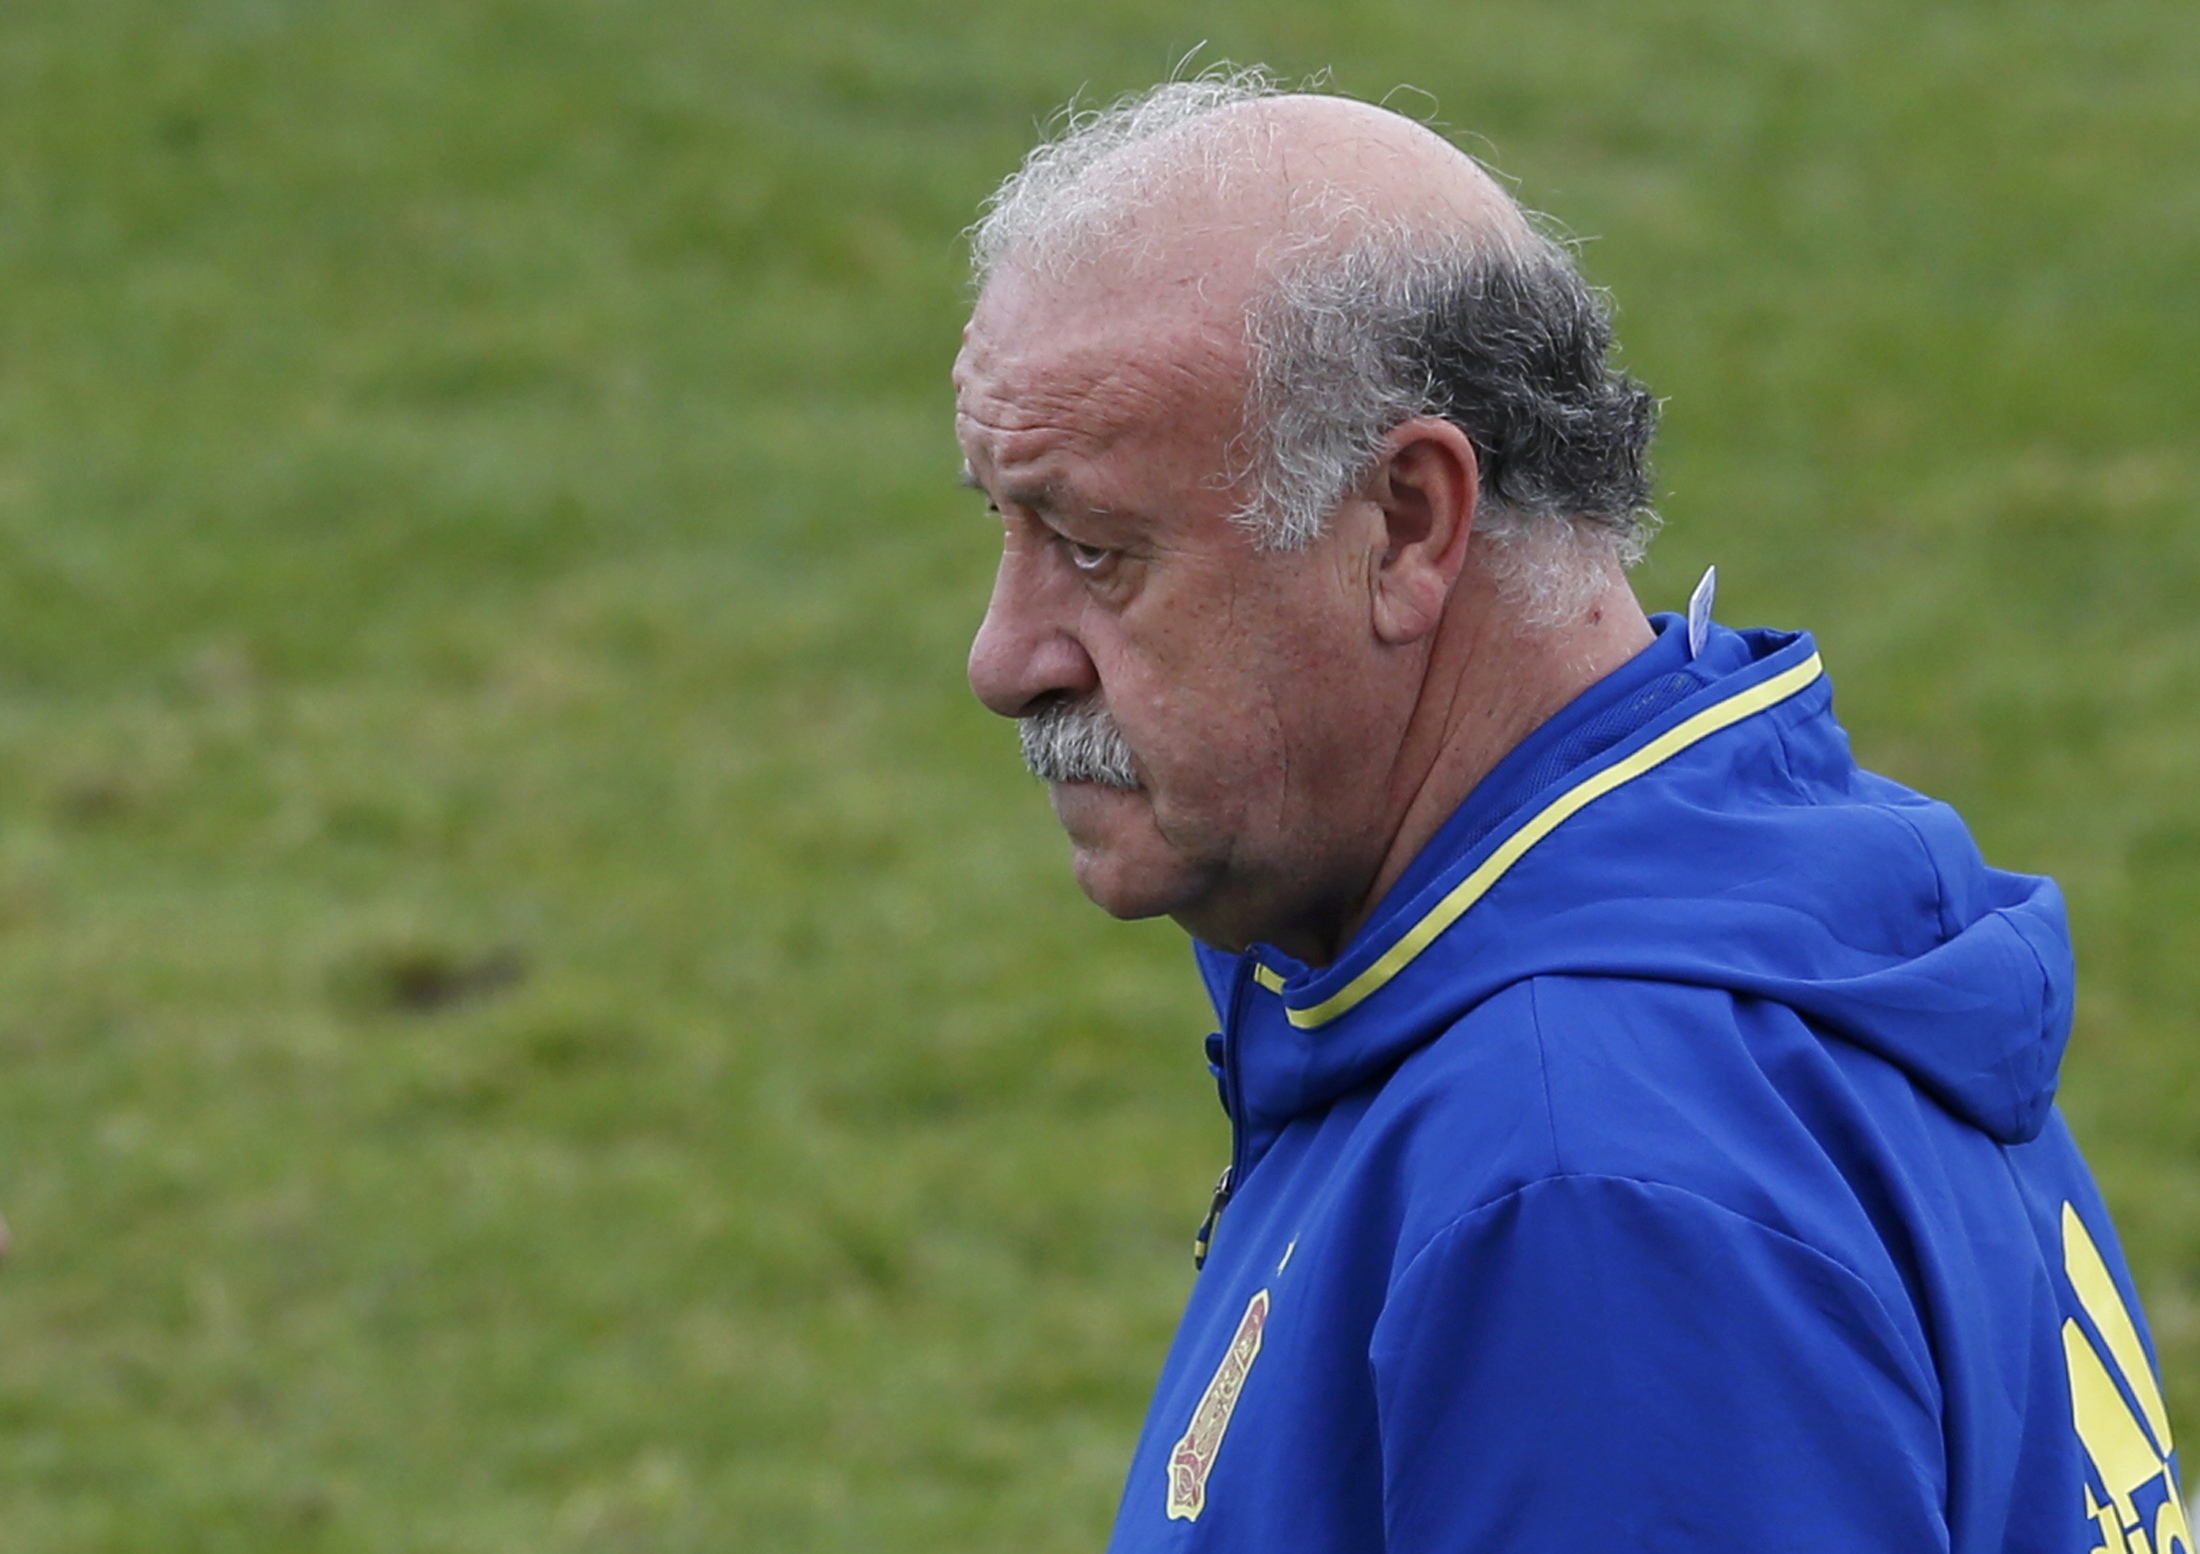 Euro 2016: Spain's Del Bosque not getting drawn into mind games